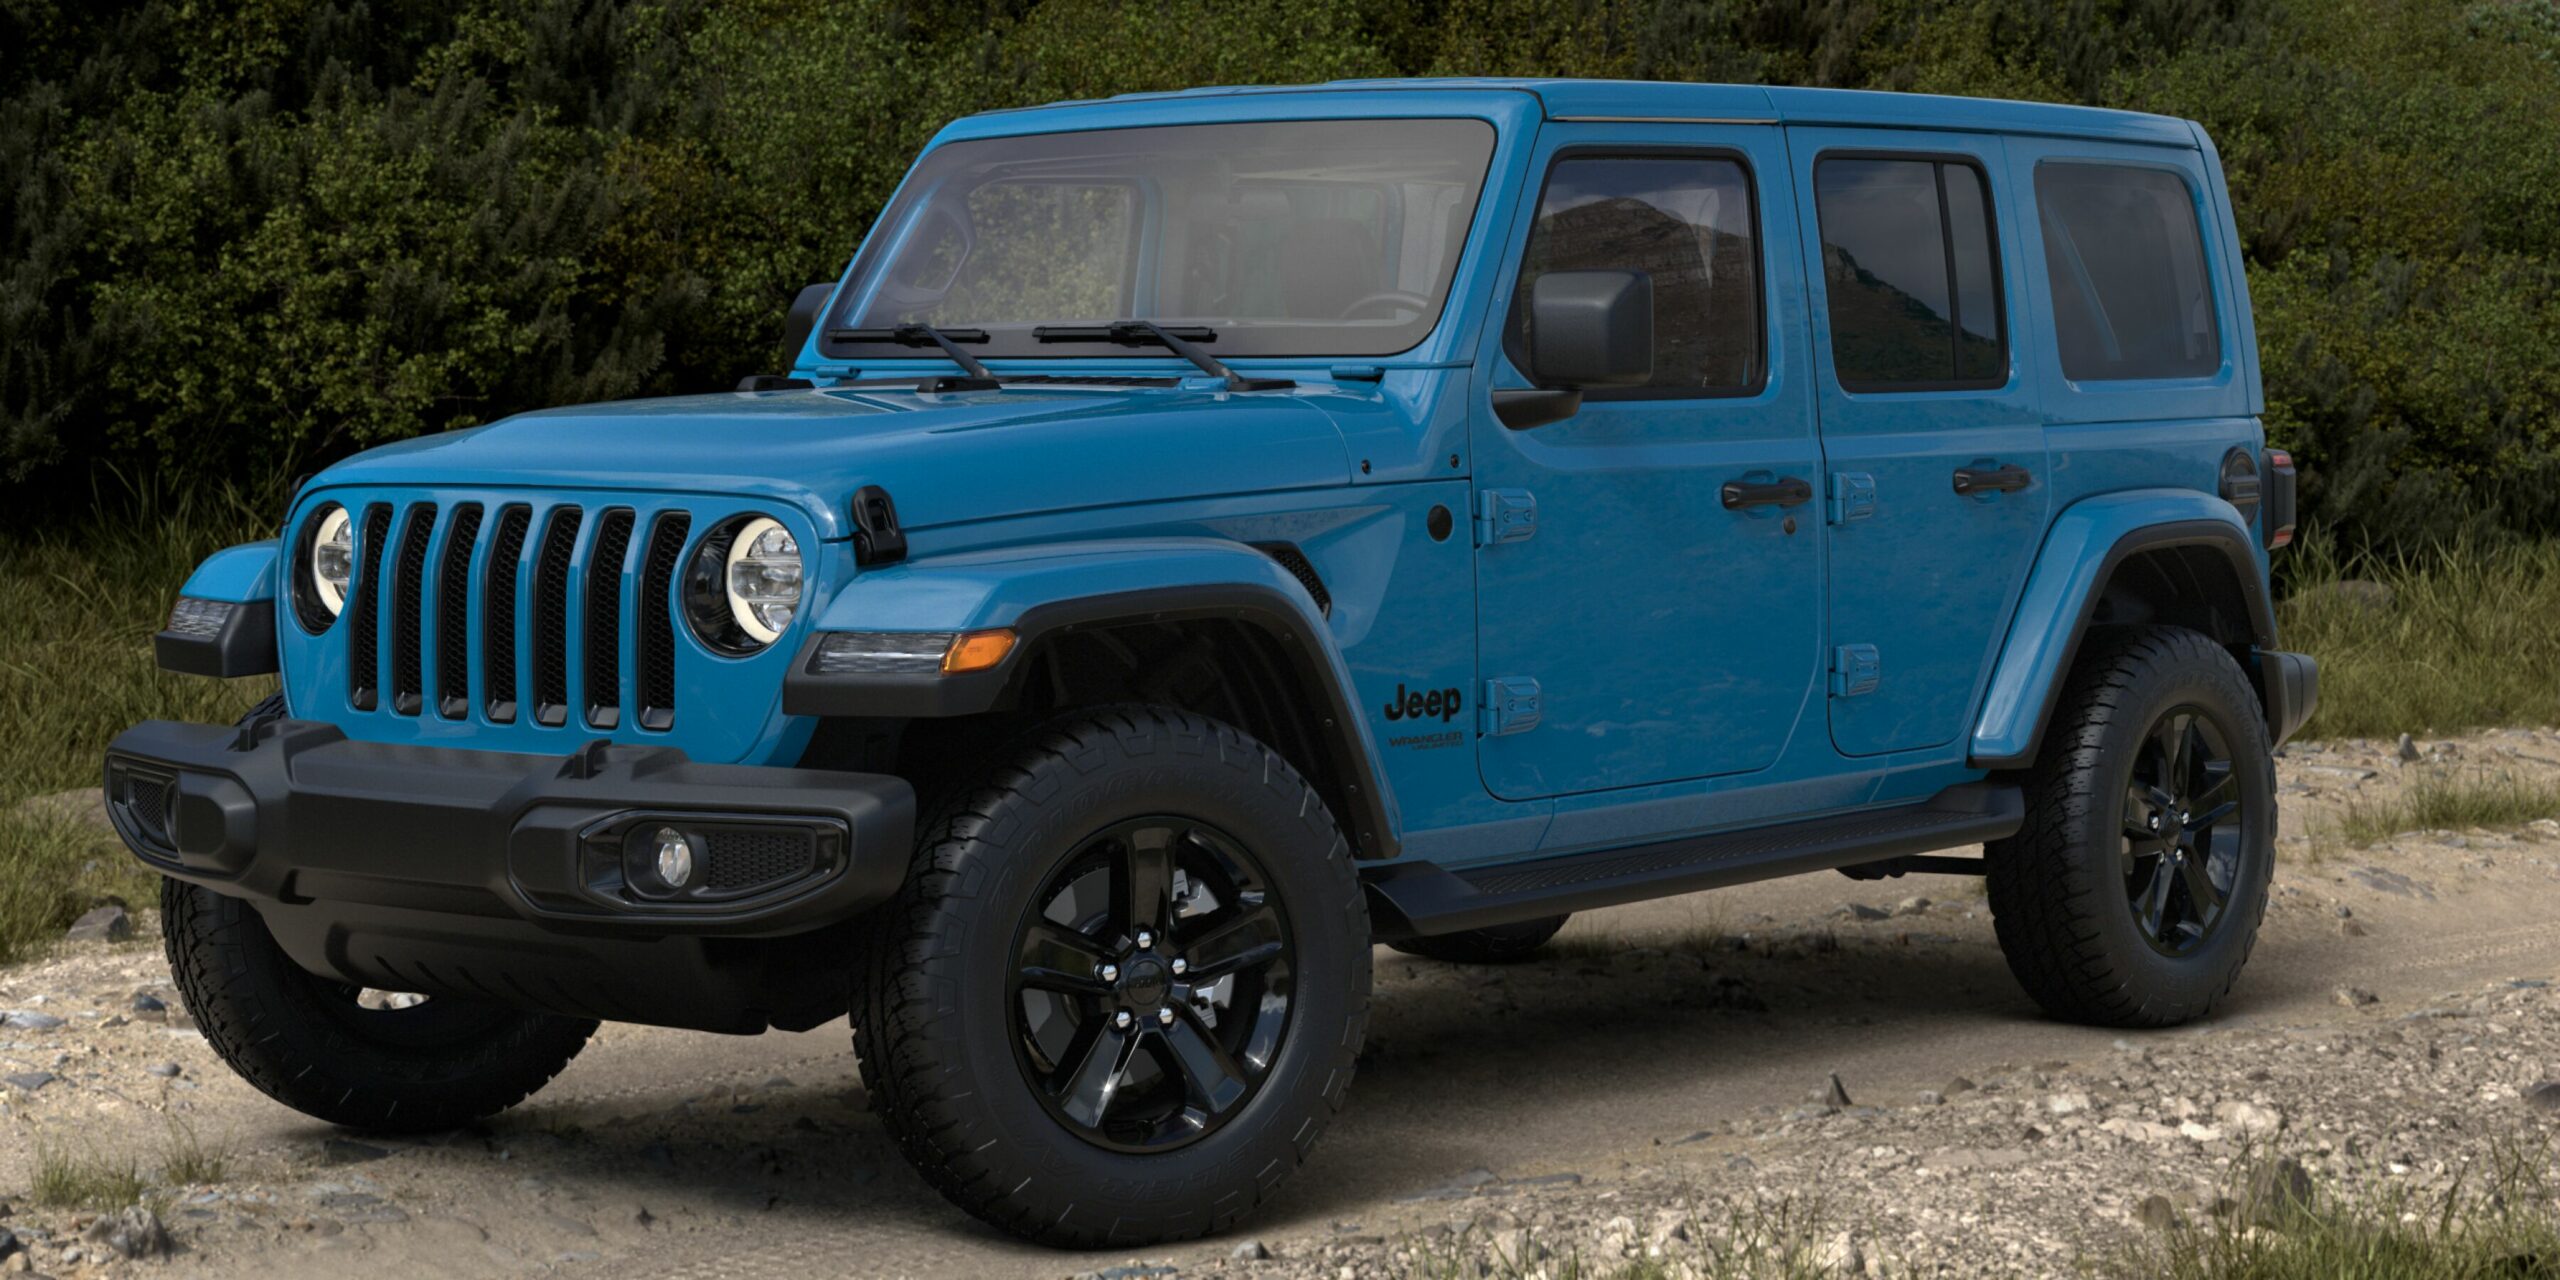 Paint The Town Blue Chief Is Back On Wrangler Models Moparinsiders